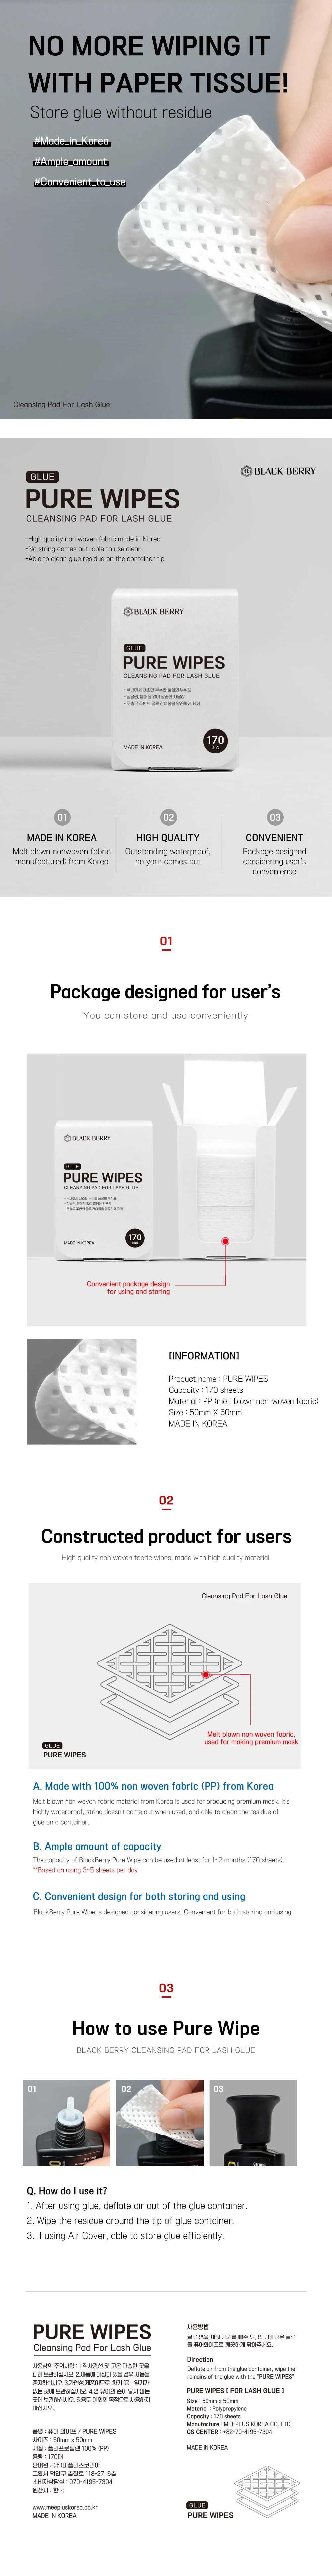 No more messy glues. PureWipes glue residue with BLACKBERRY PURE-WIPE to store glue clean. Made with melt-blown nonwoven fabric